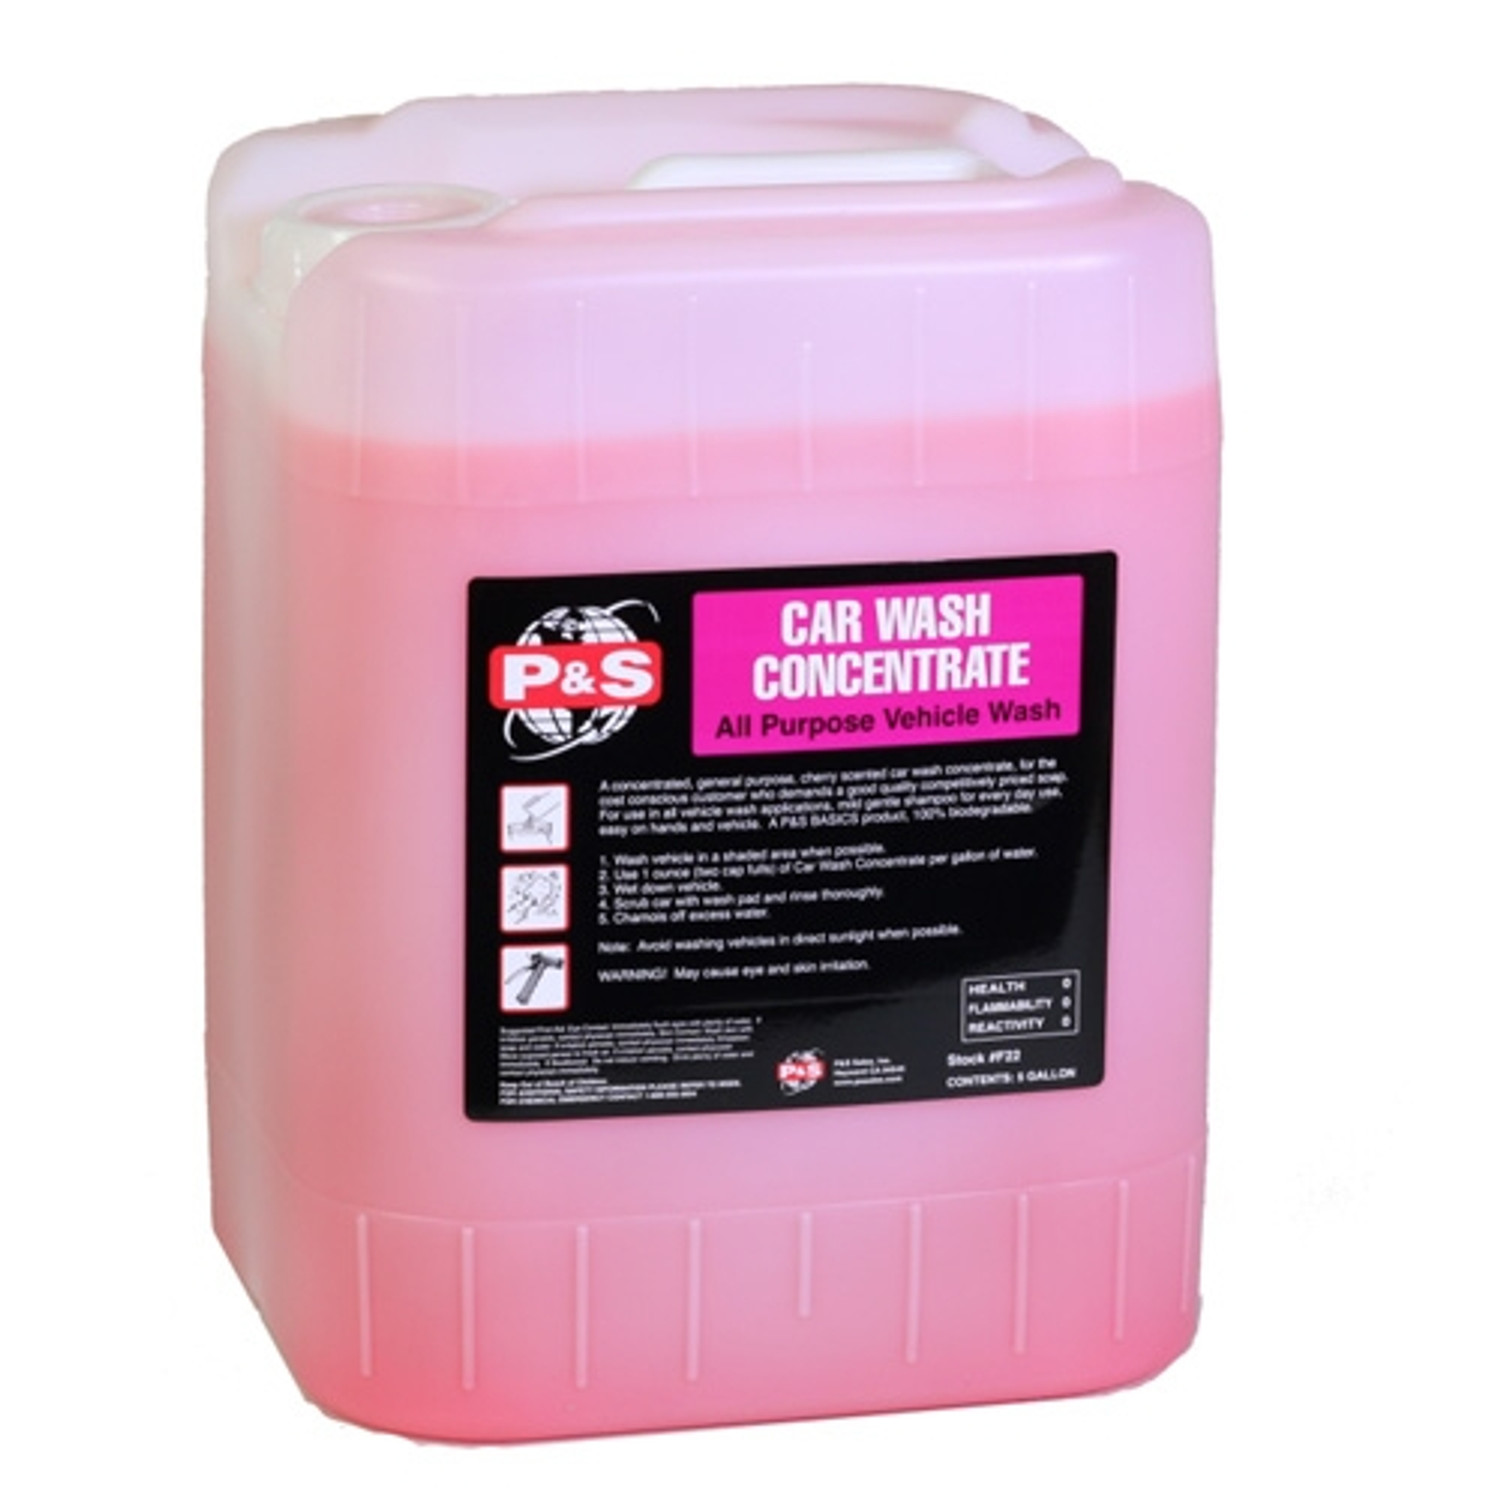 P&S Car Wash Concentrate 5 Gallon  Cherry Scented Vehicle Shampoo